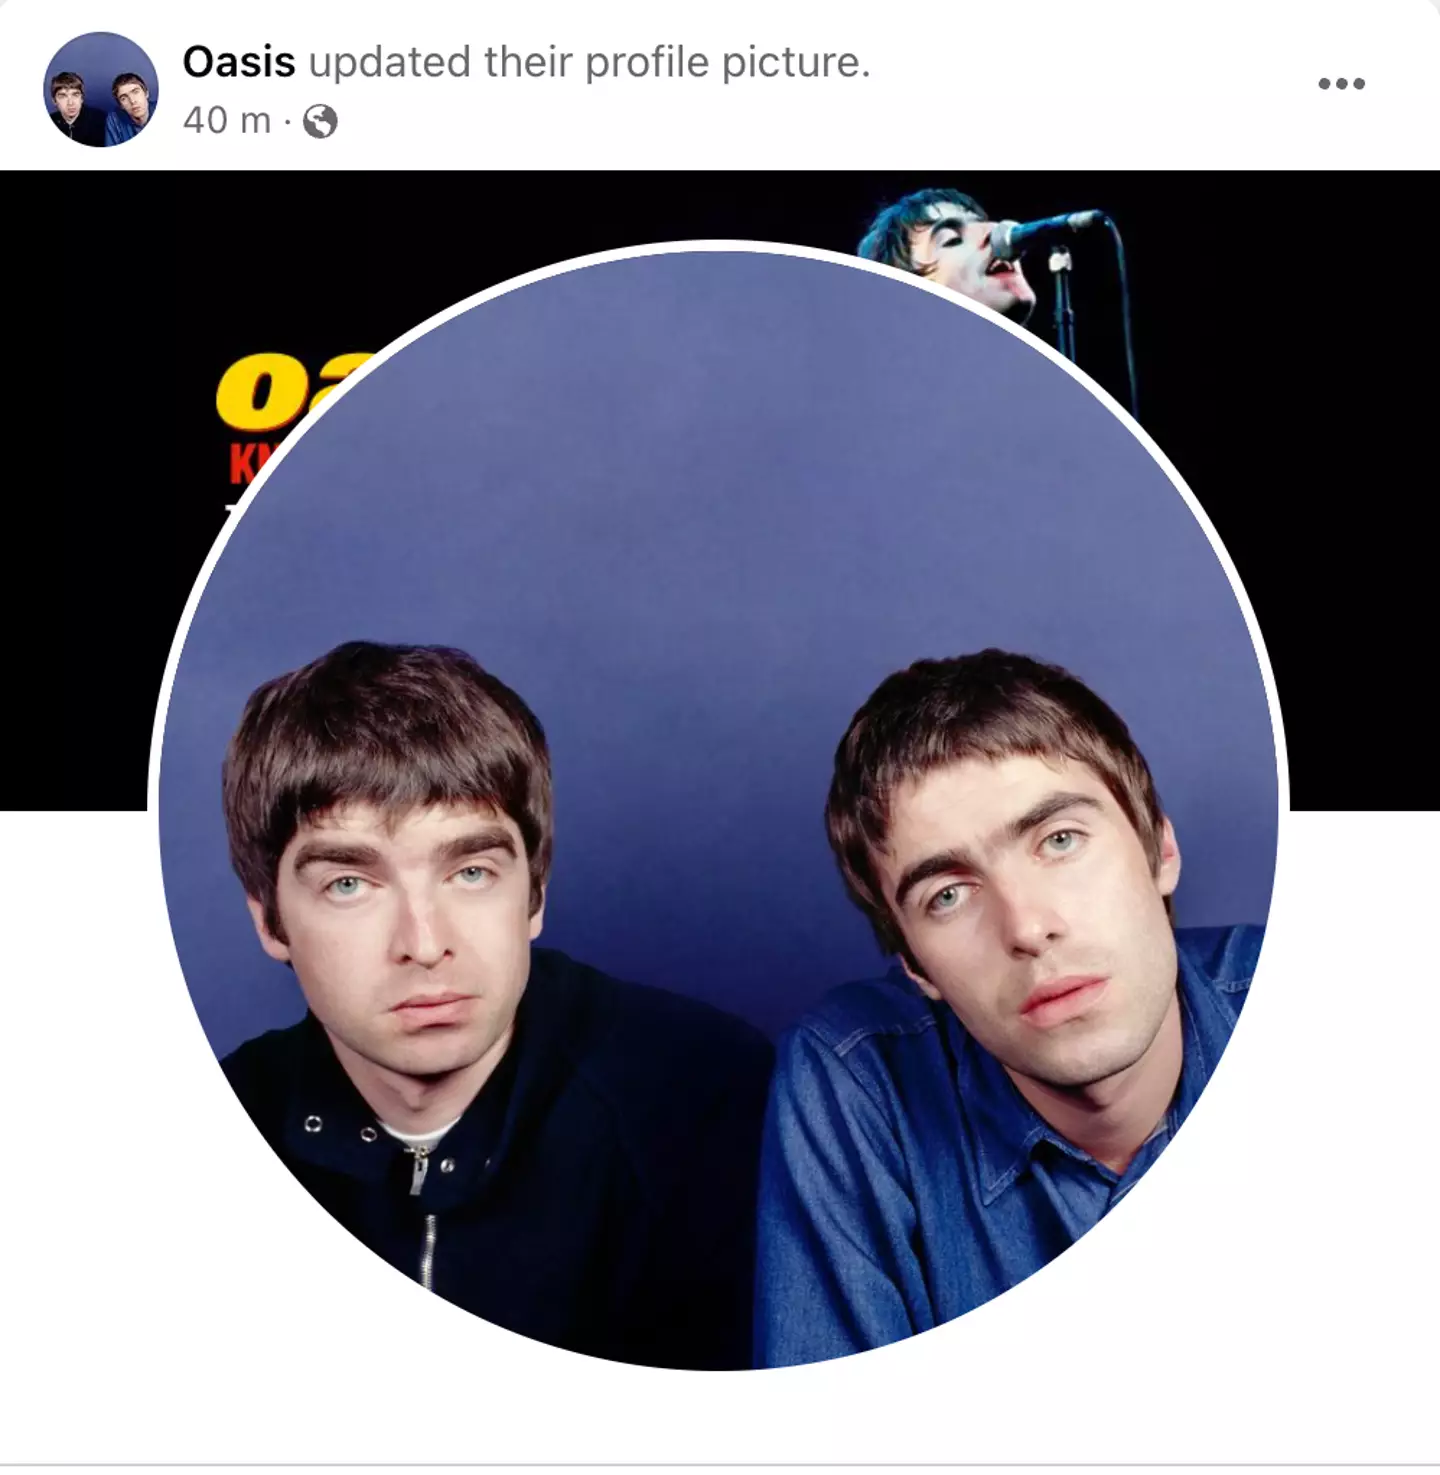 The Oasis Facebook's picture change set tongues wagging.